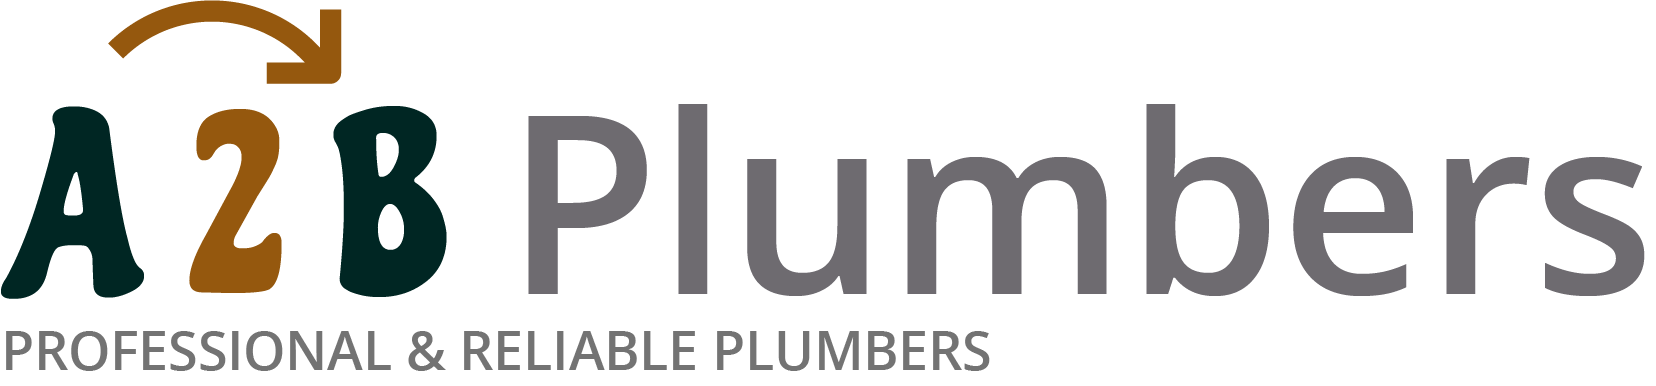 If you need a boiler installed, a radiator repaired or a leaking tap fixed, call us now - we provide services for properties in Peterlee and the local area.